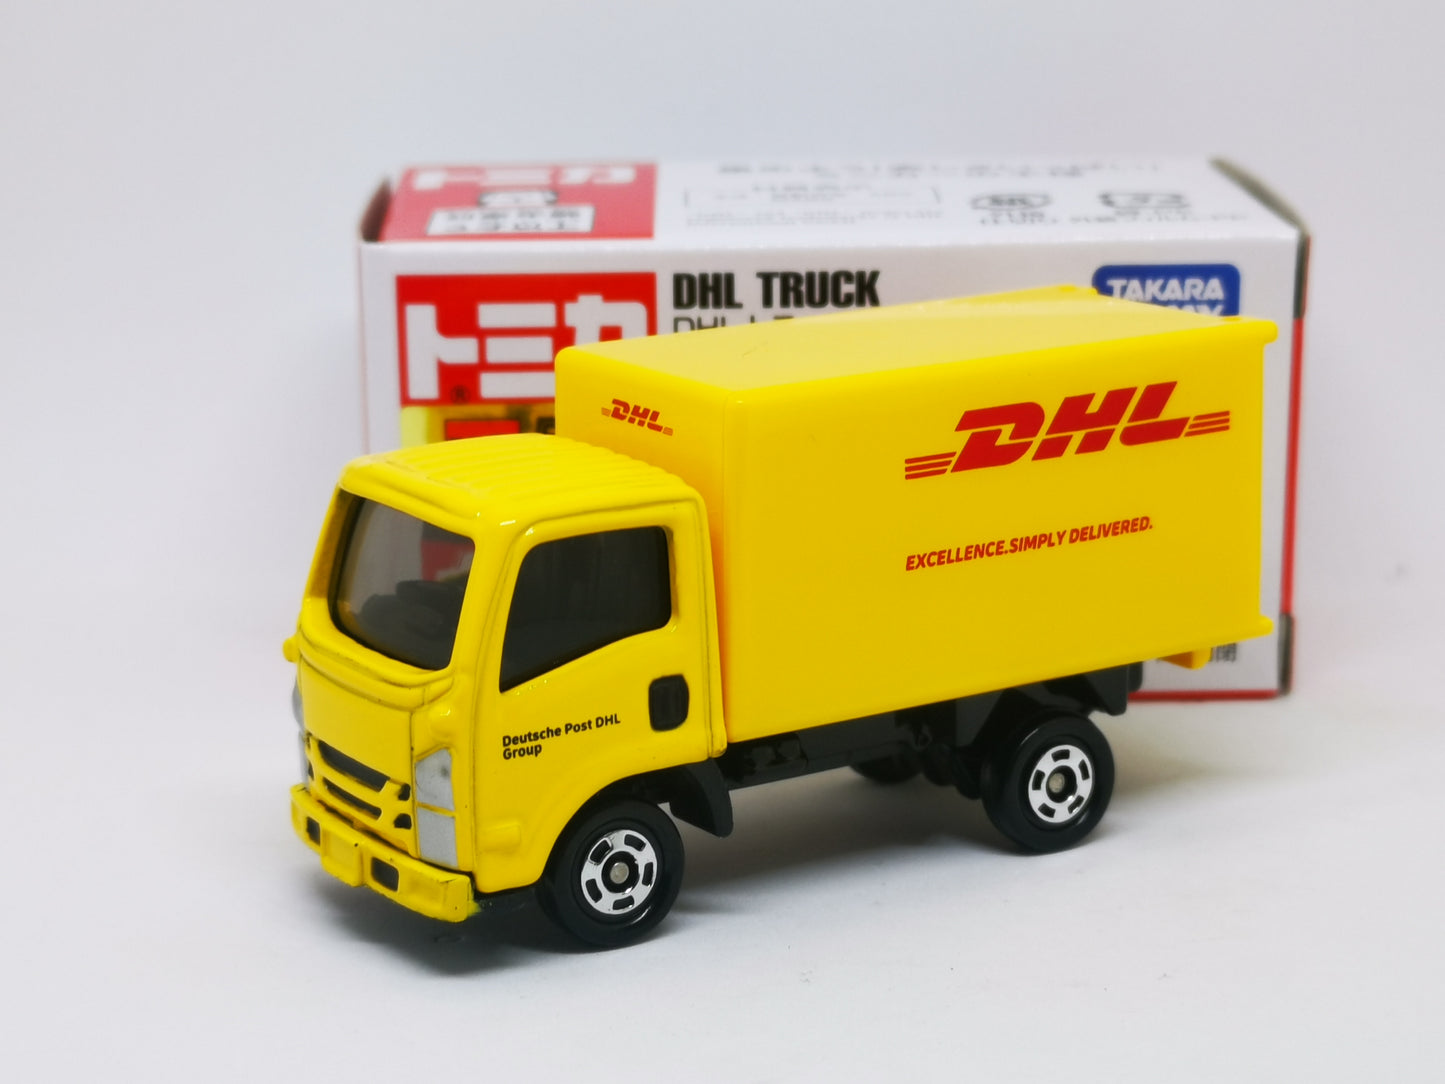 TOMICA #109 DHL Delivery Truck